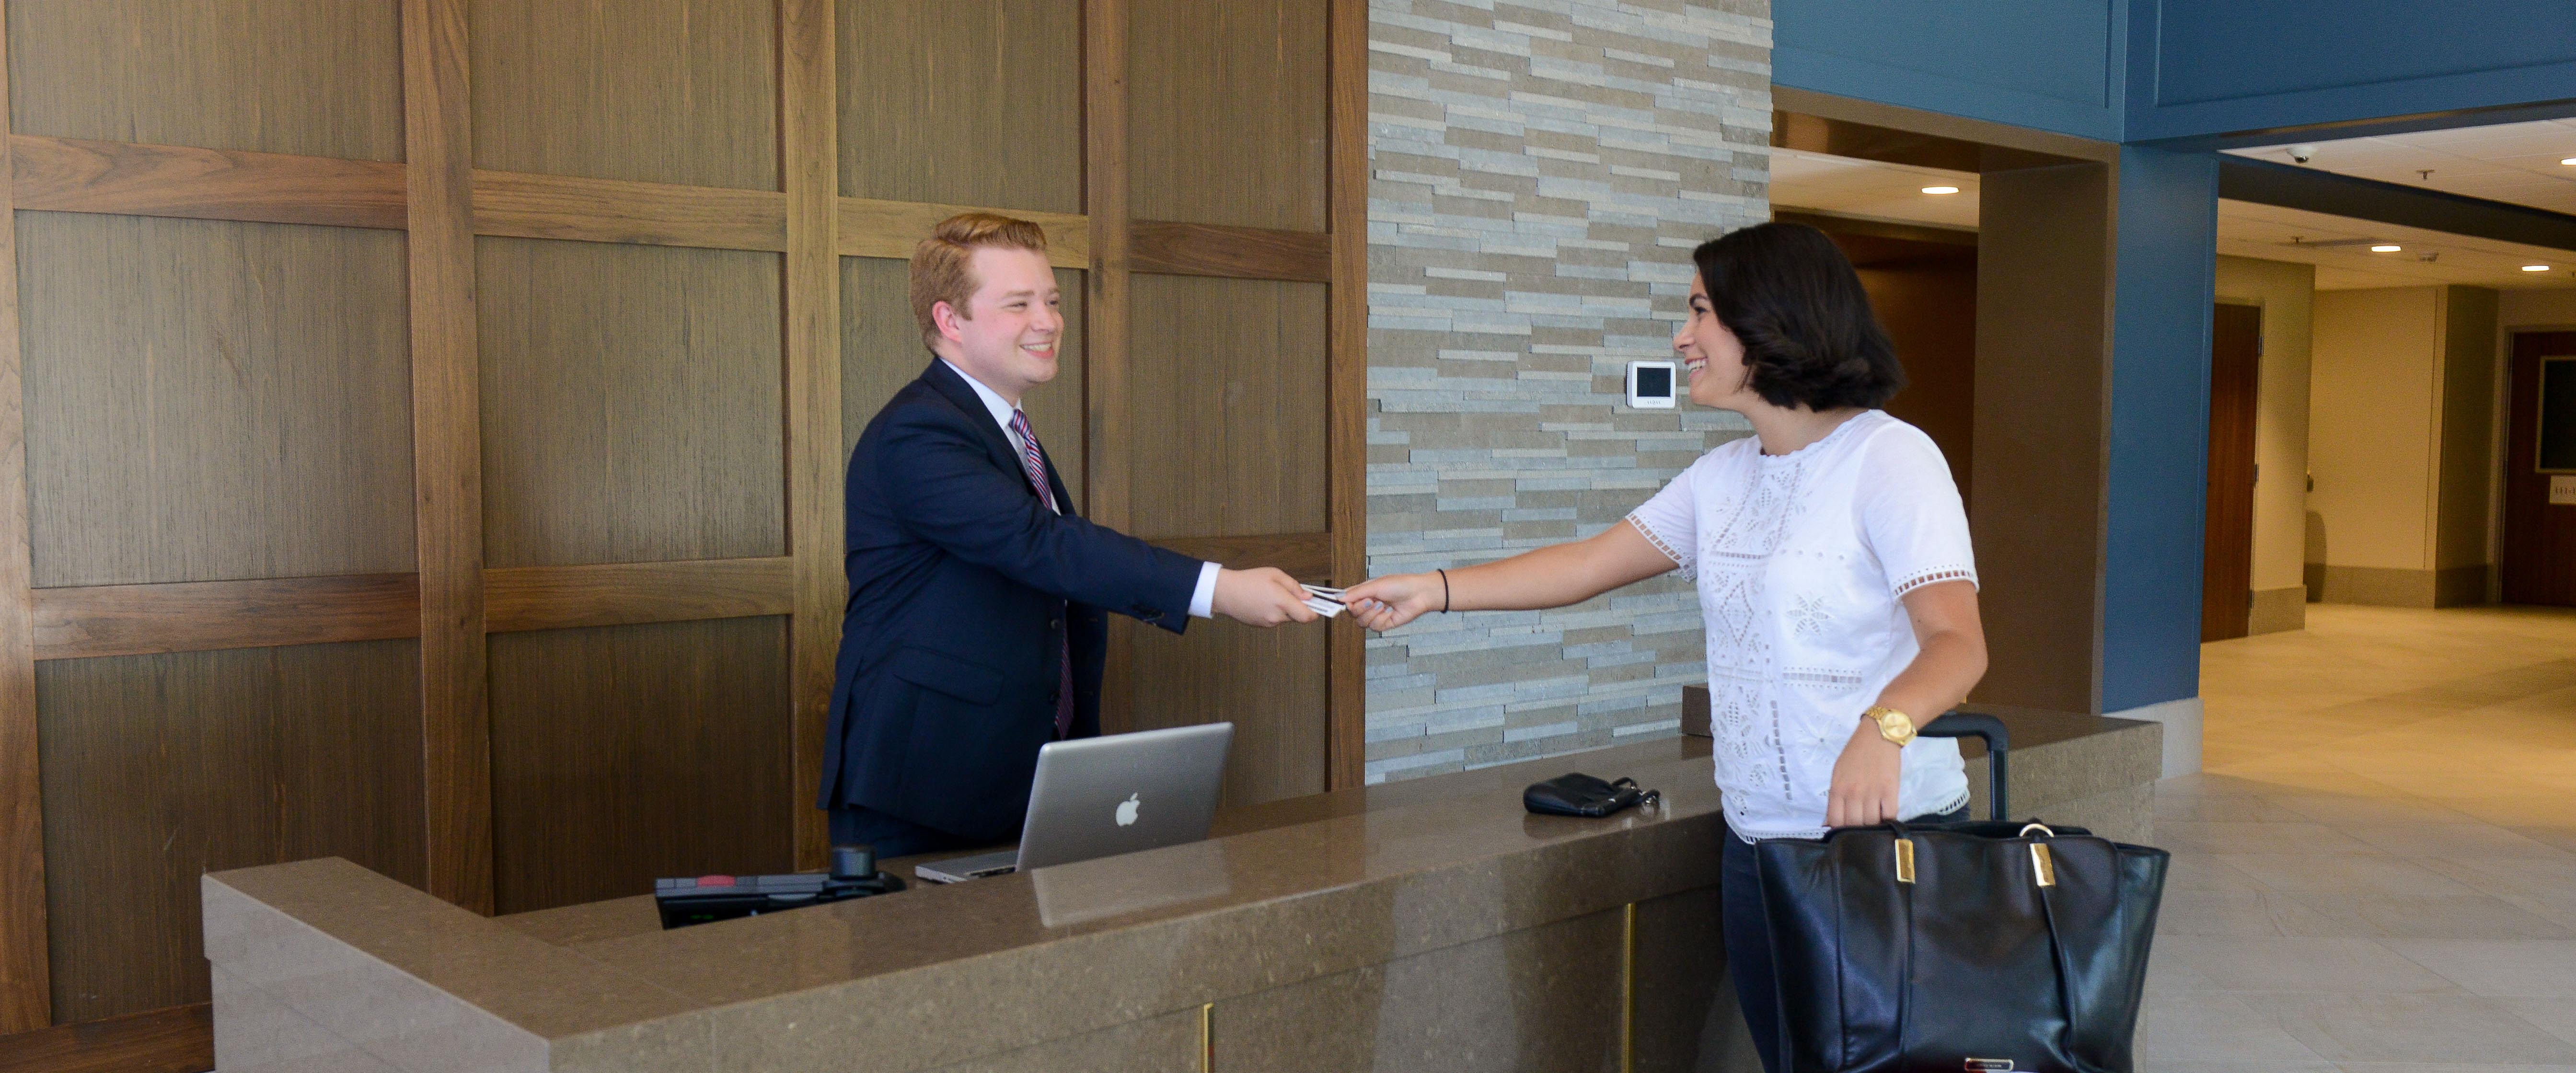 Women with suitcases receives room key cards from concierge behind a desk